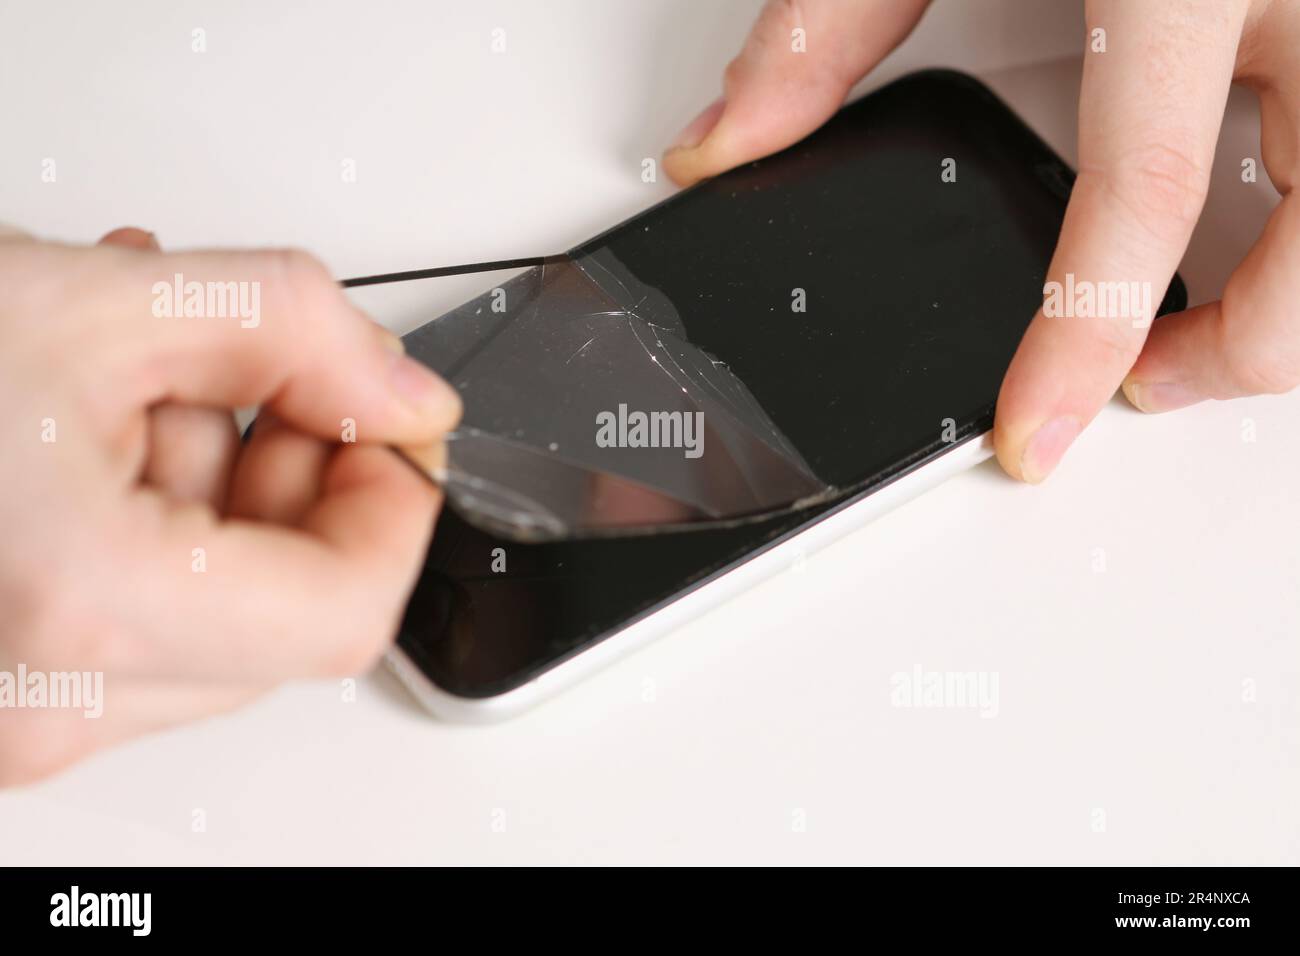 The man removes the old cracked protective glass from the phone. Broken protective glass Stock Photo